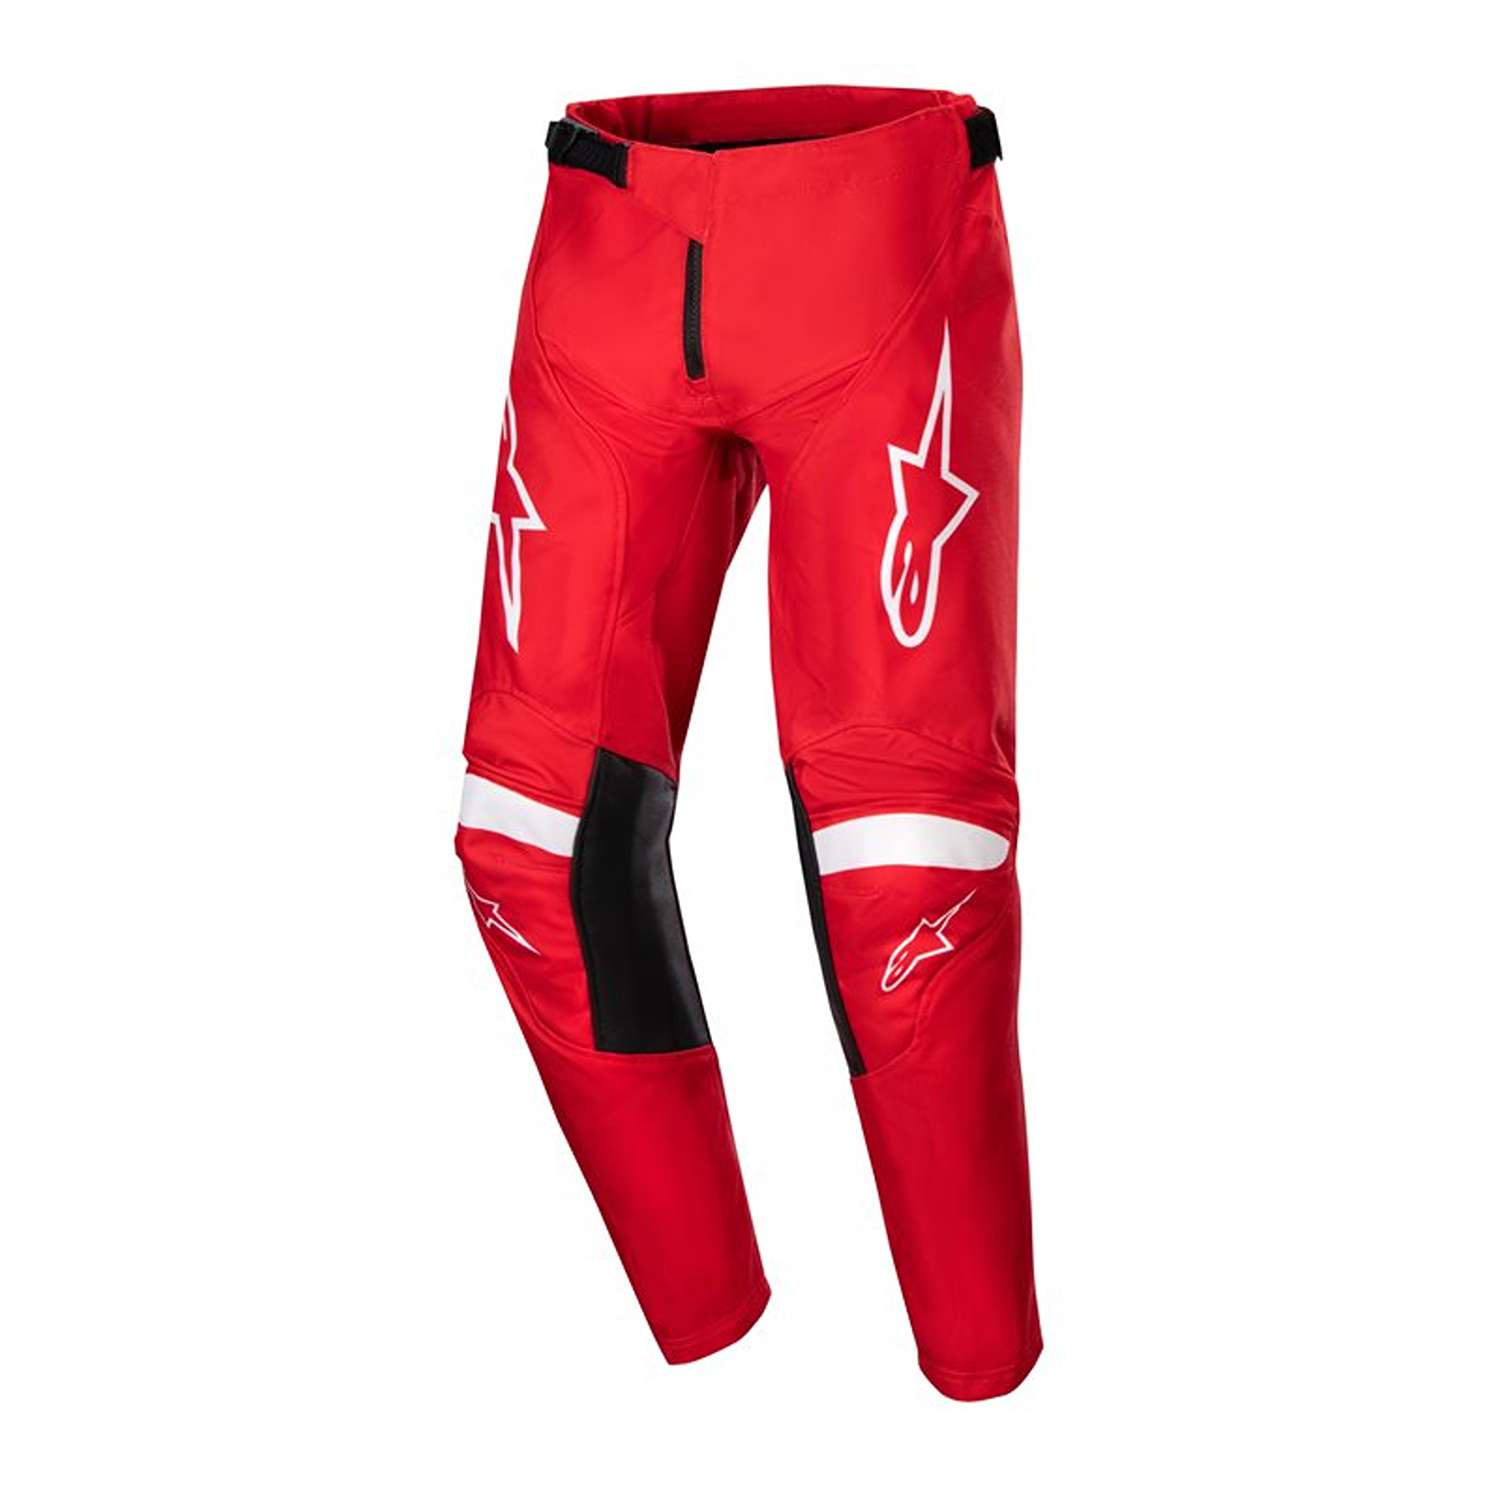 Image of EU Alpinestars Youth Racer Lurv Pants Mars Red White Taille 26